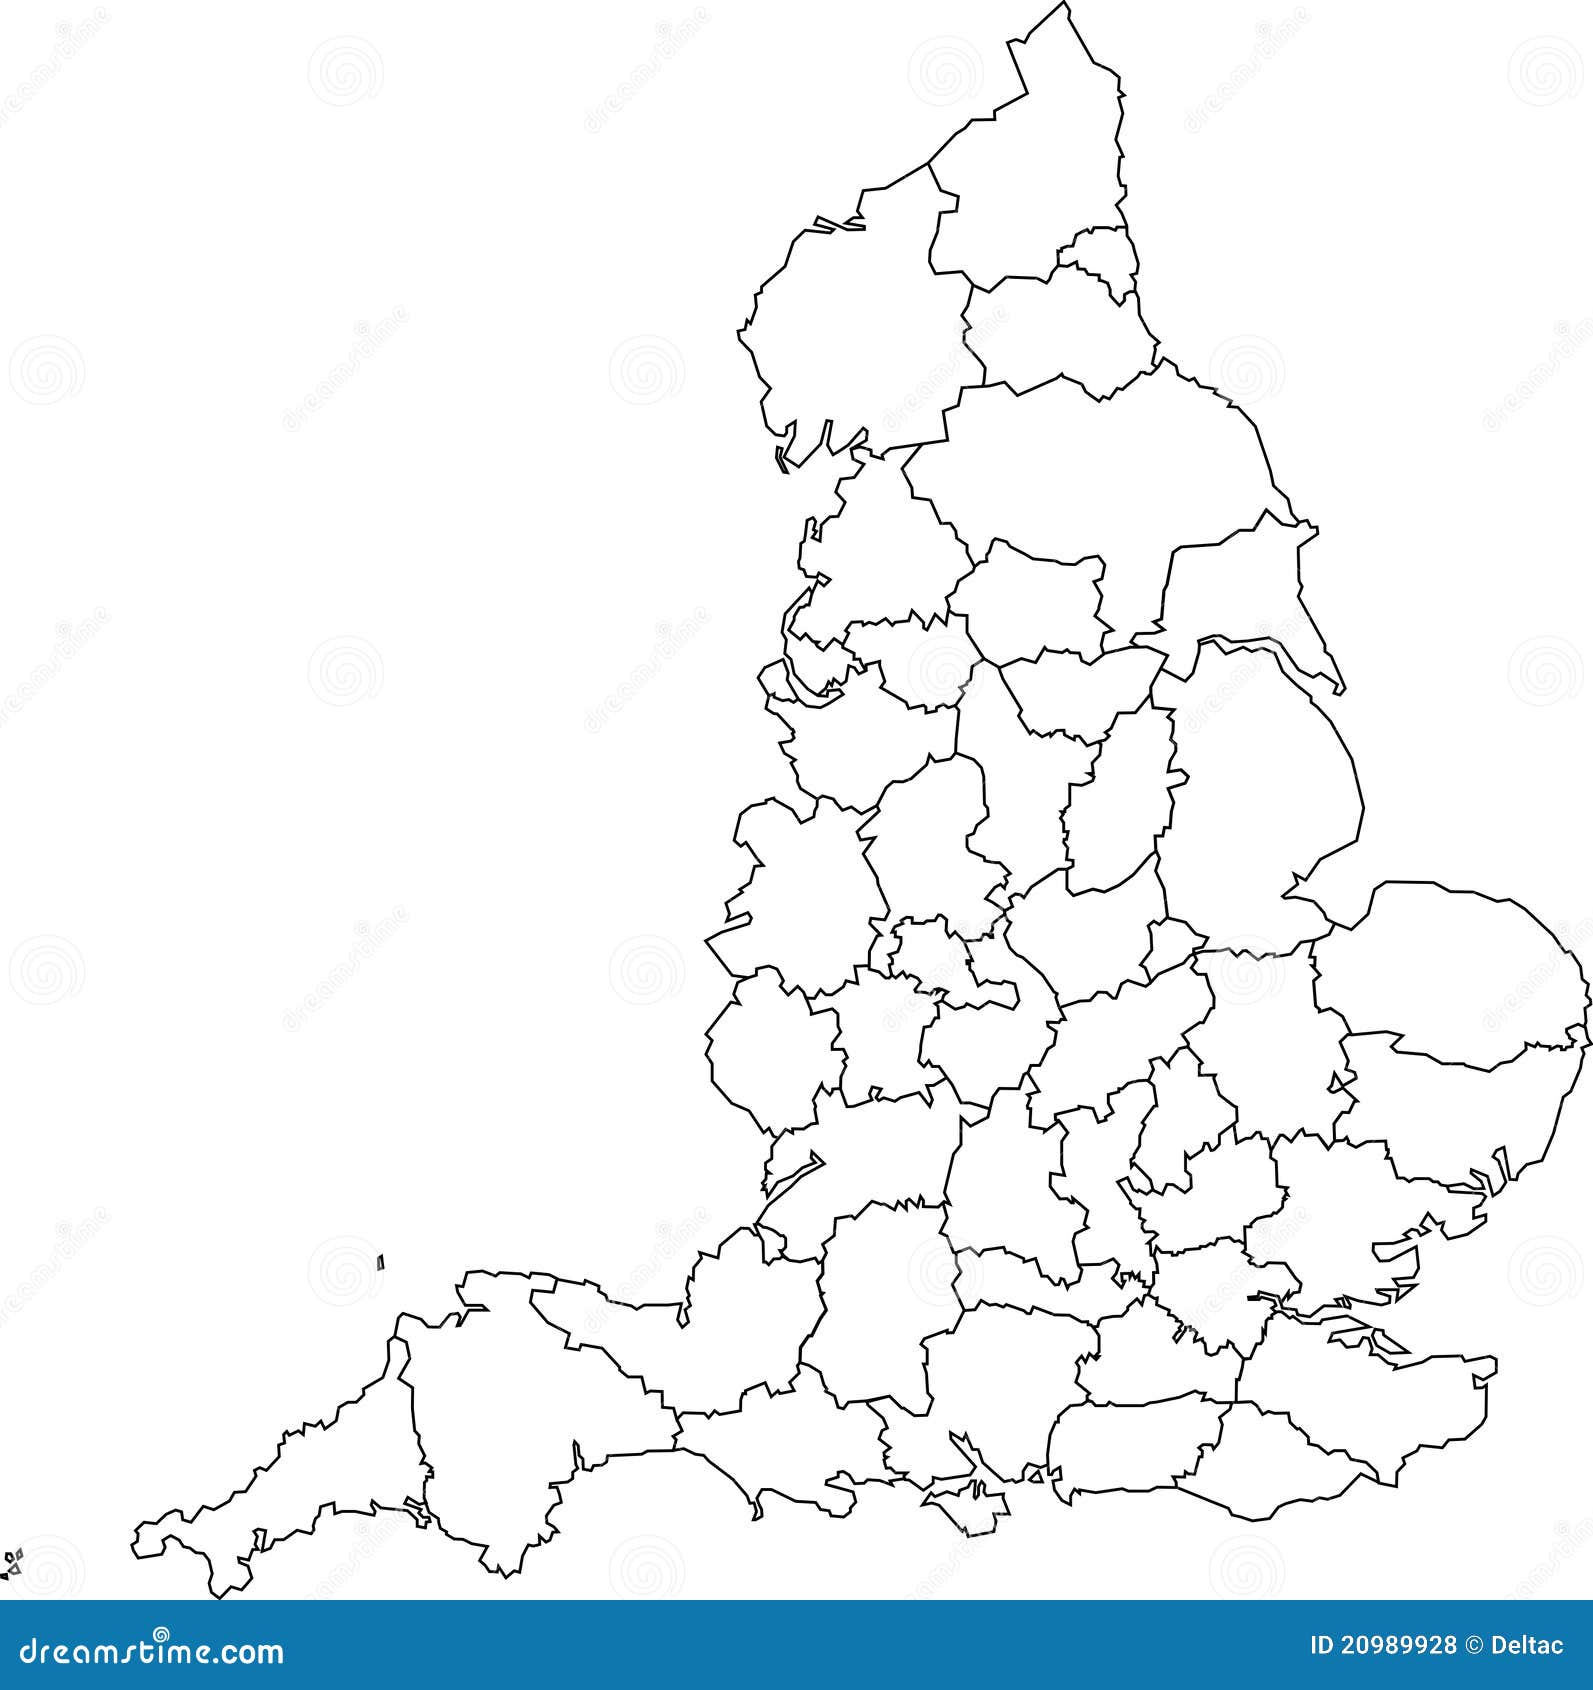 blank map of england - counties